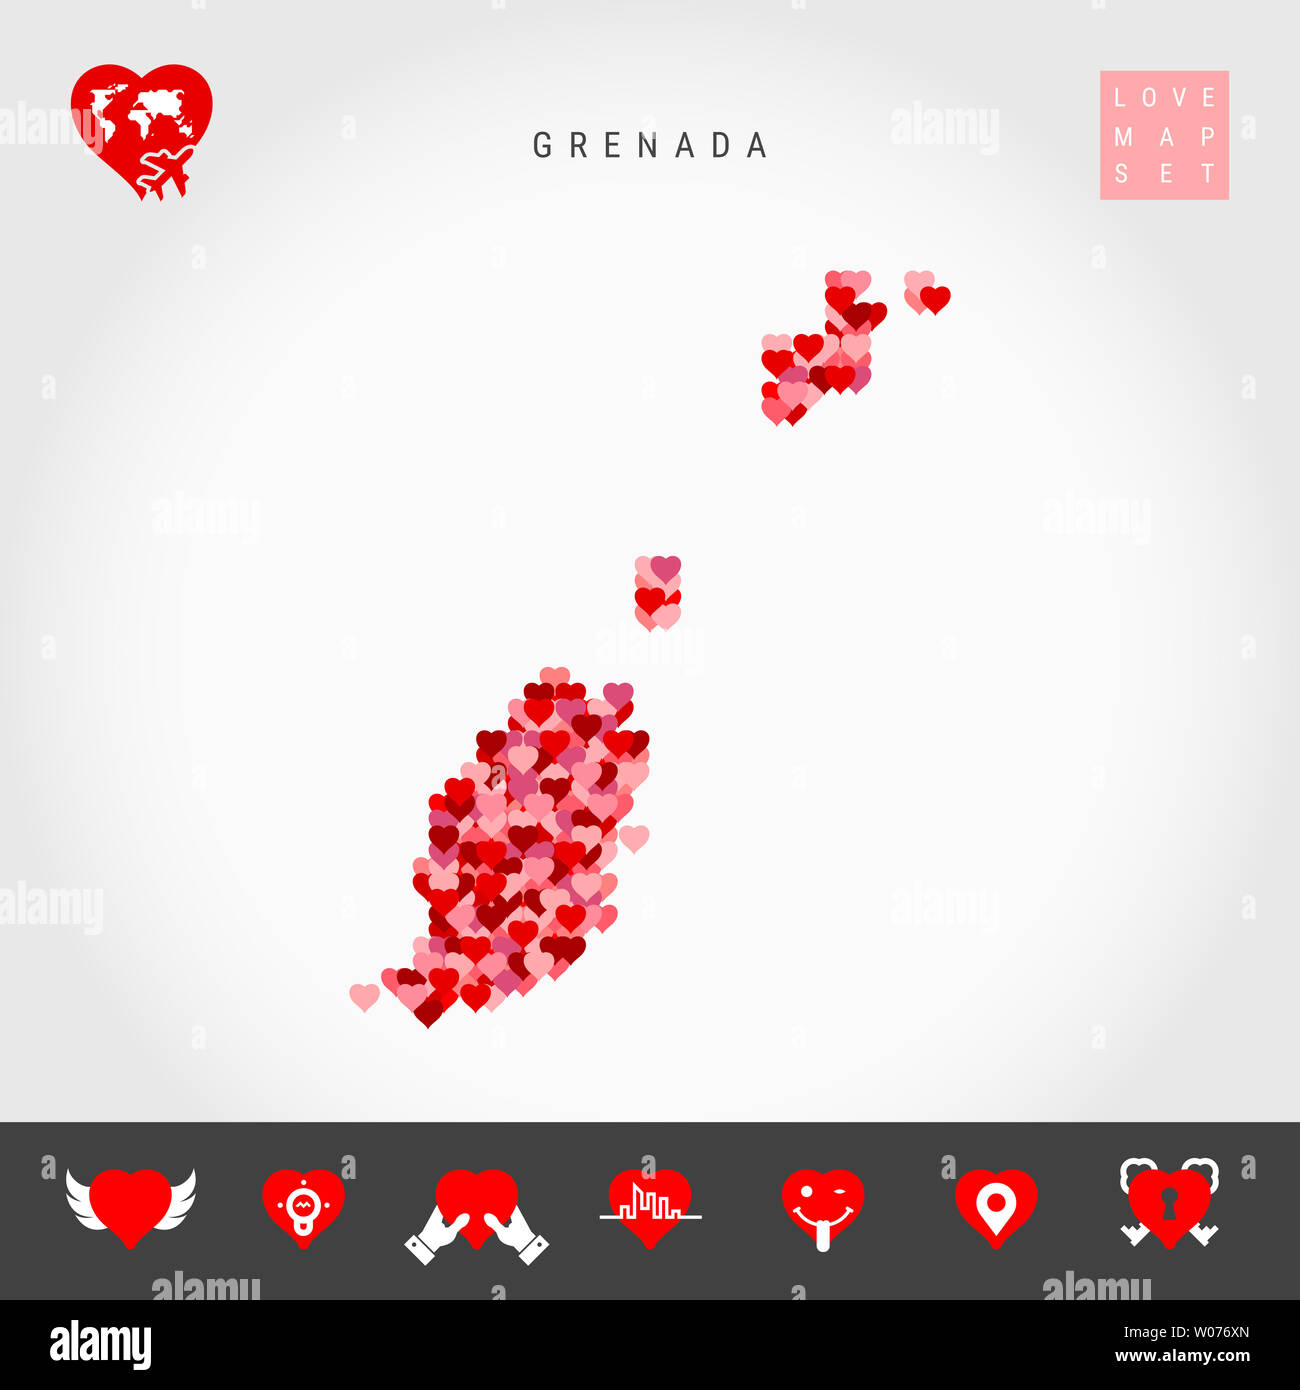 Red and Pink Hearts Pattern Map of Grenada Isolated on Grey Background. Love Icon Set. Stock Photo